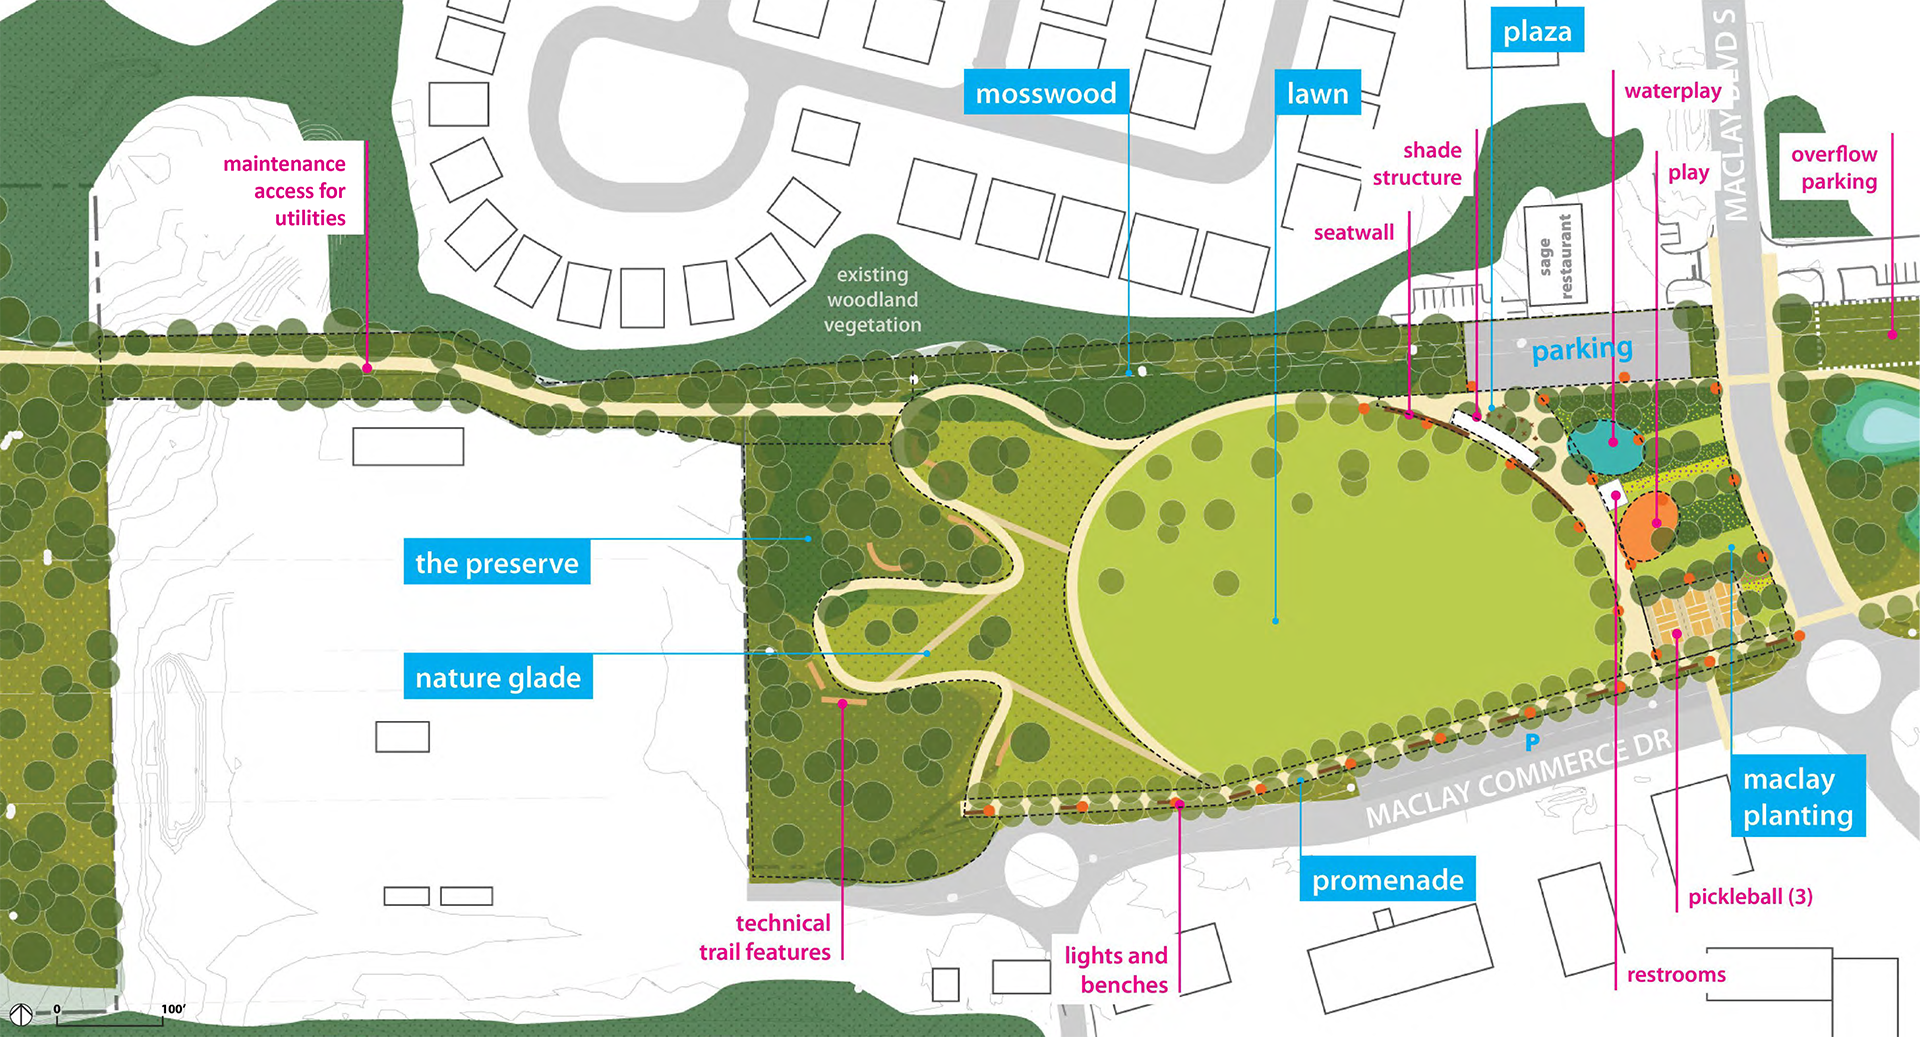 Concept Plan of the Park Area